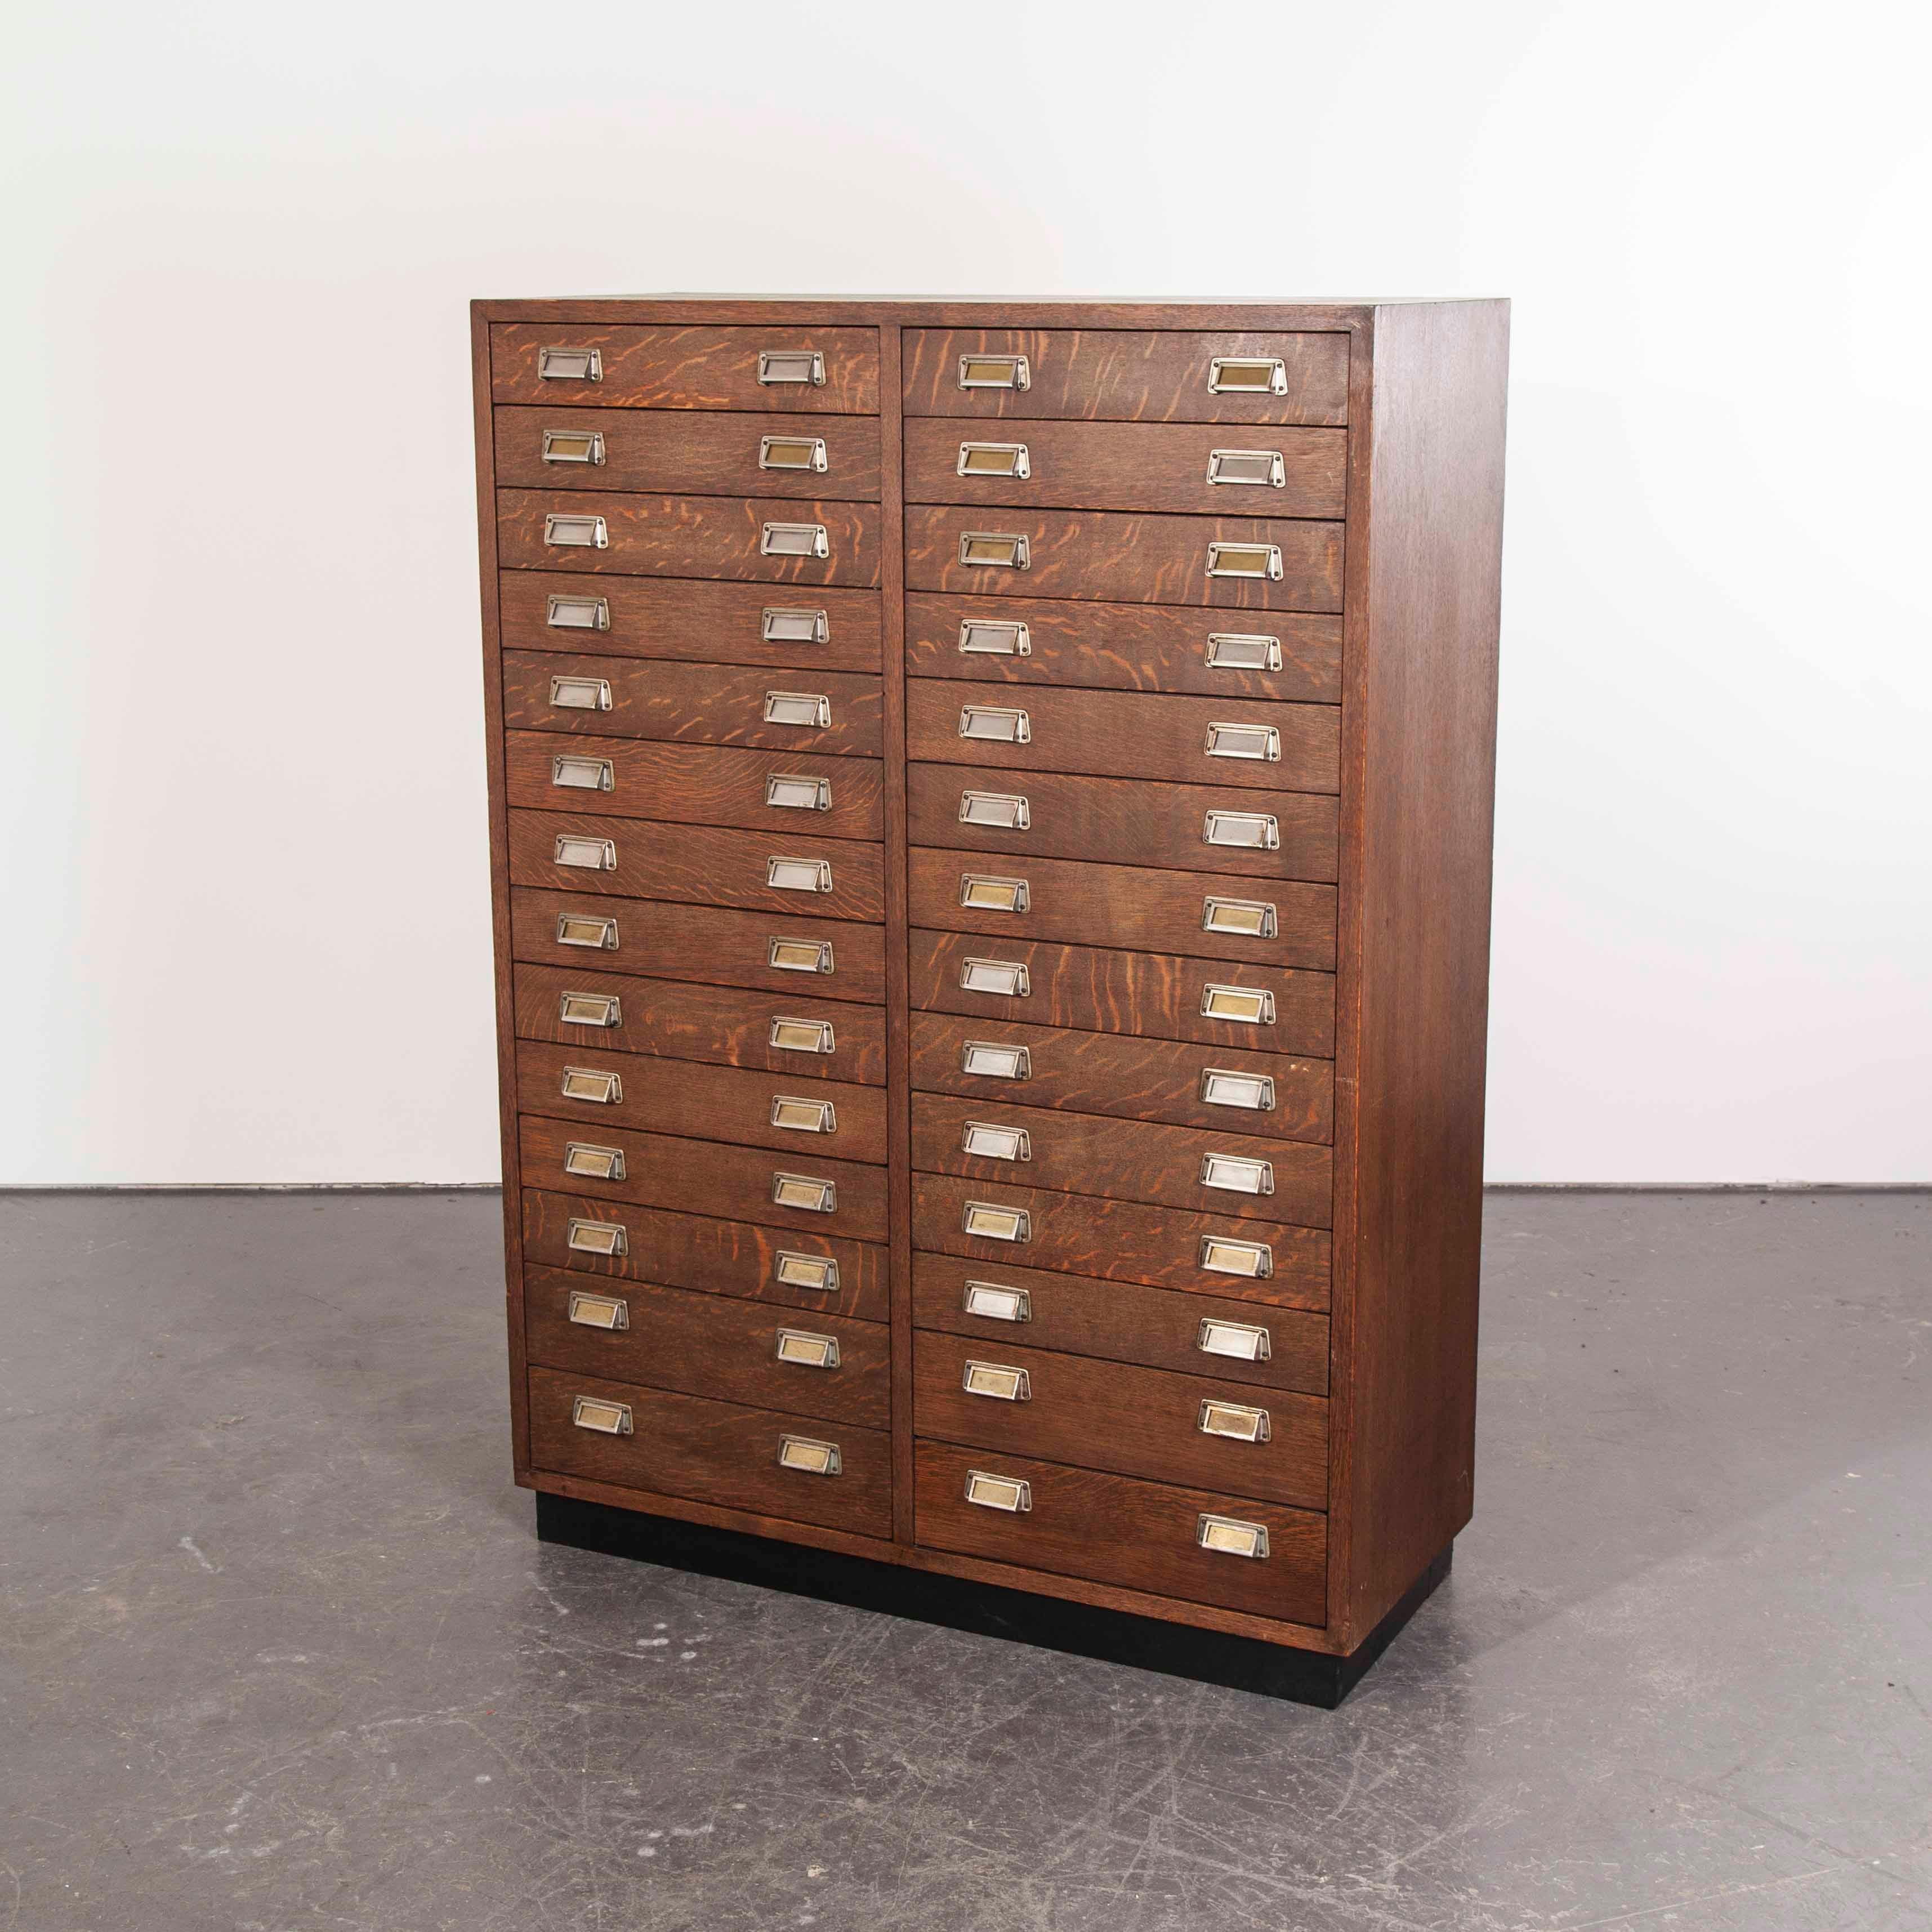 German 1950s Oak Apothecary Multi Drawer Chest of Drawers, Twenty Eight Drawers